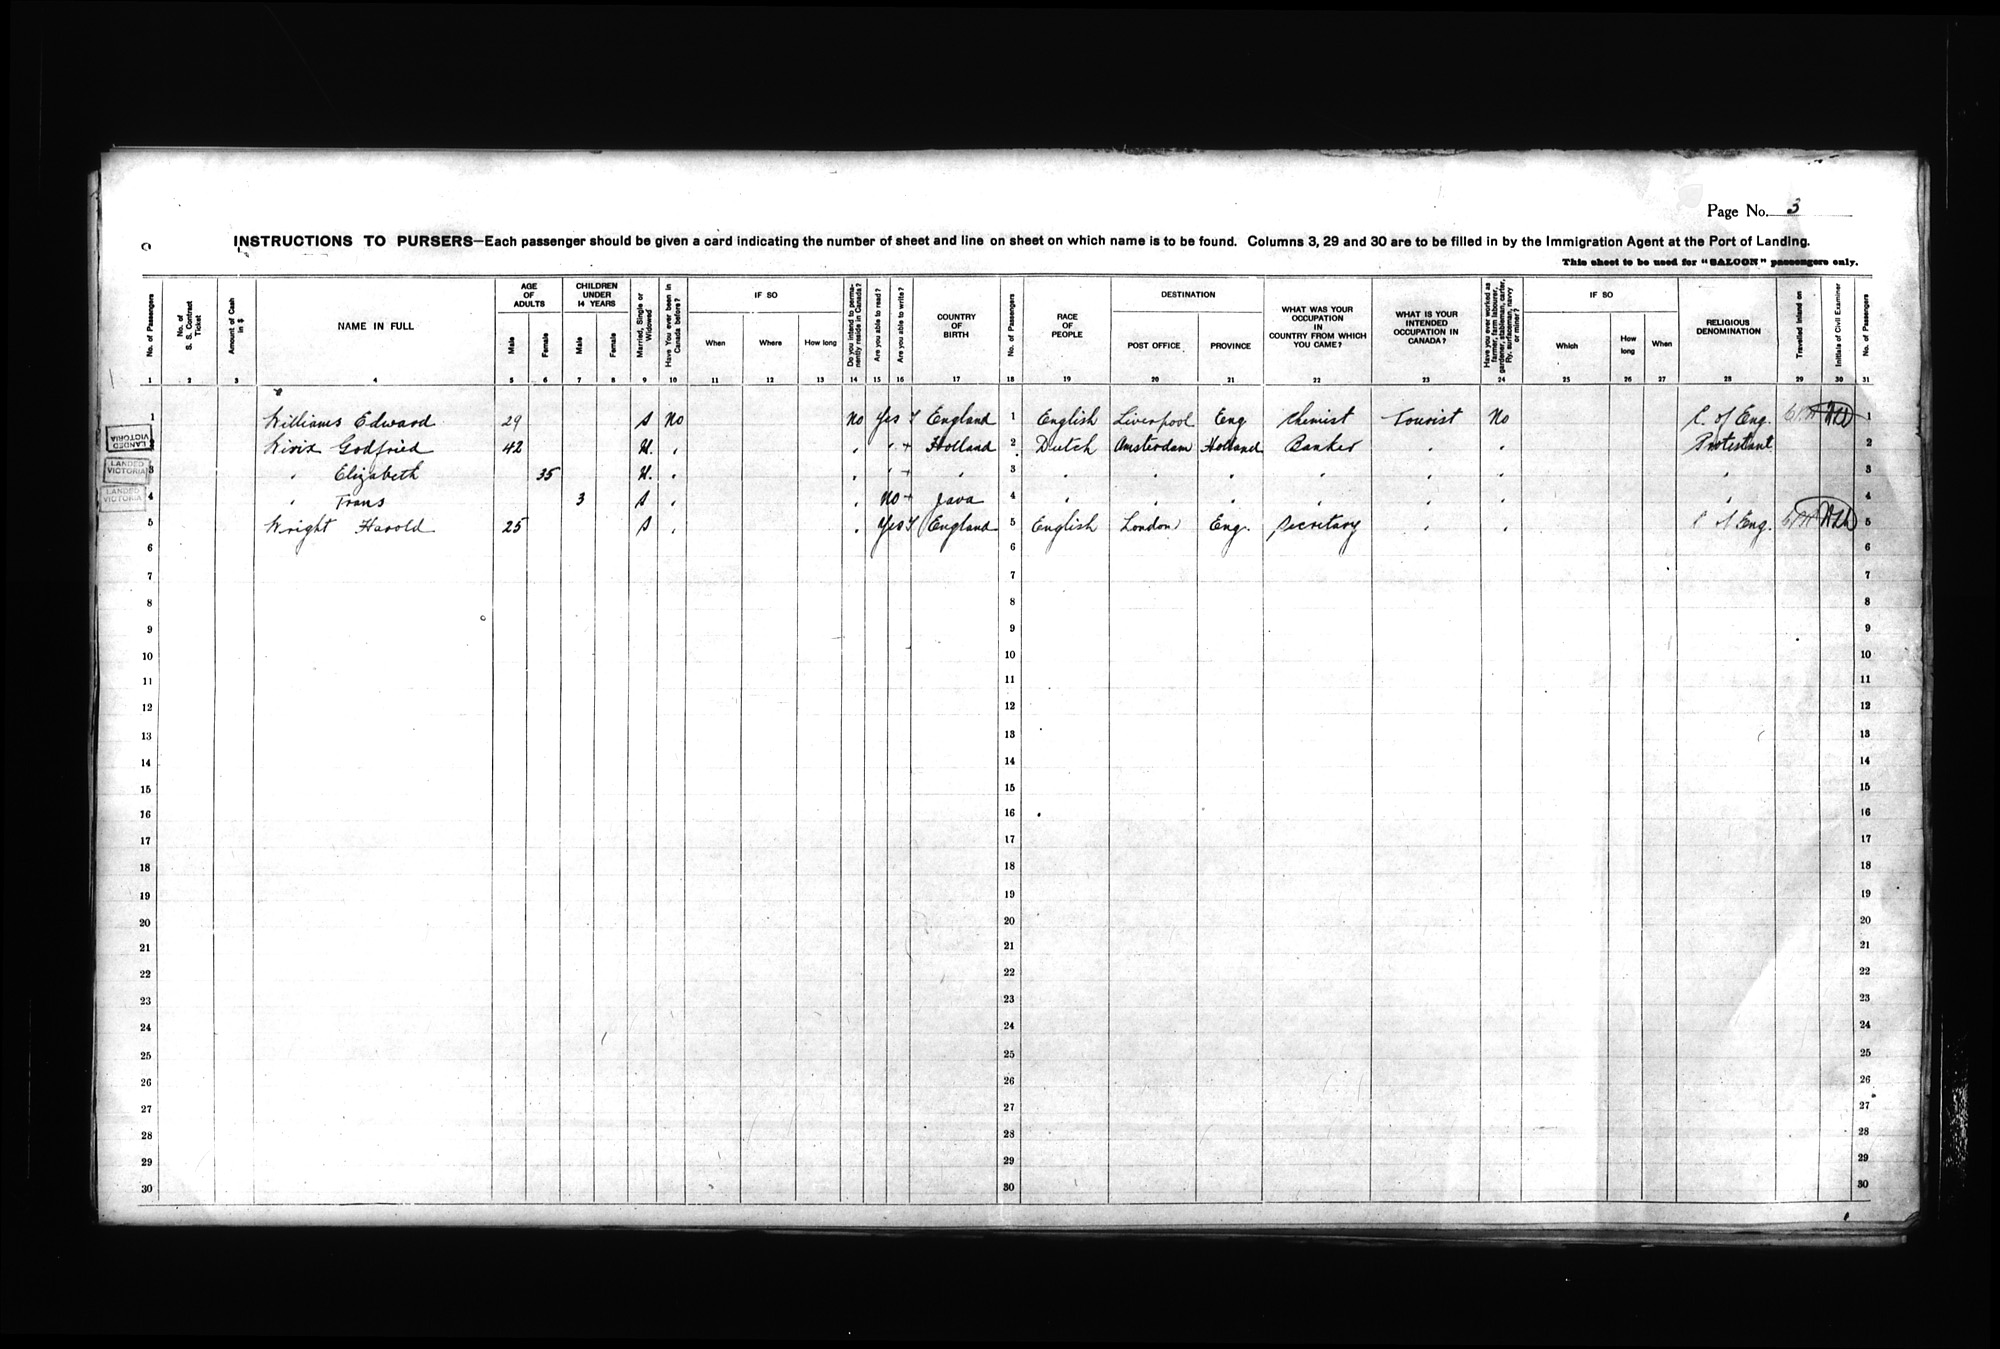 Digitized page of Passenger Lists for Image No.: CANIMM1913PLIST_0000408296-00252